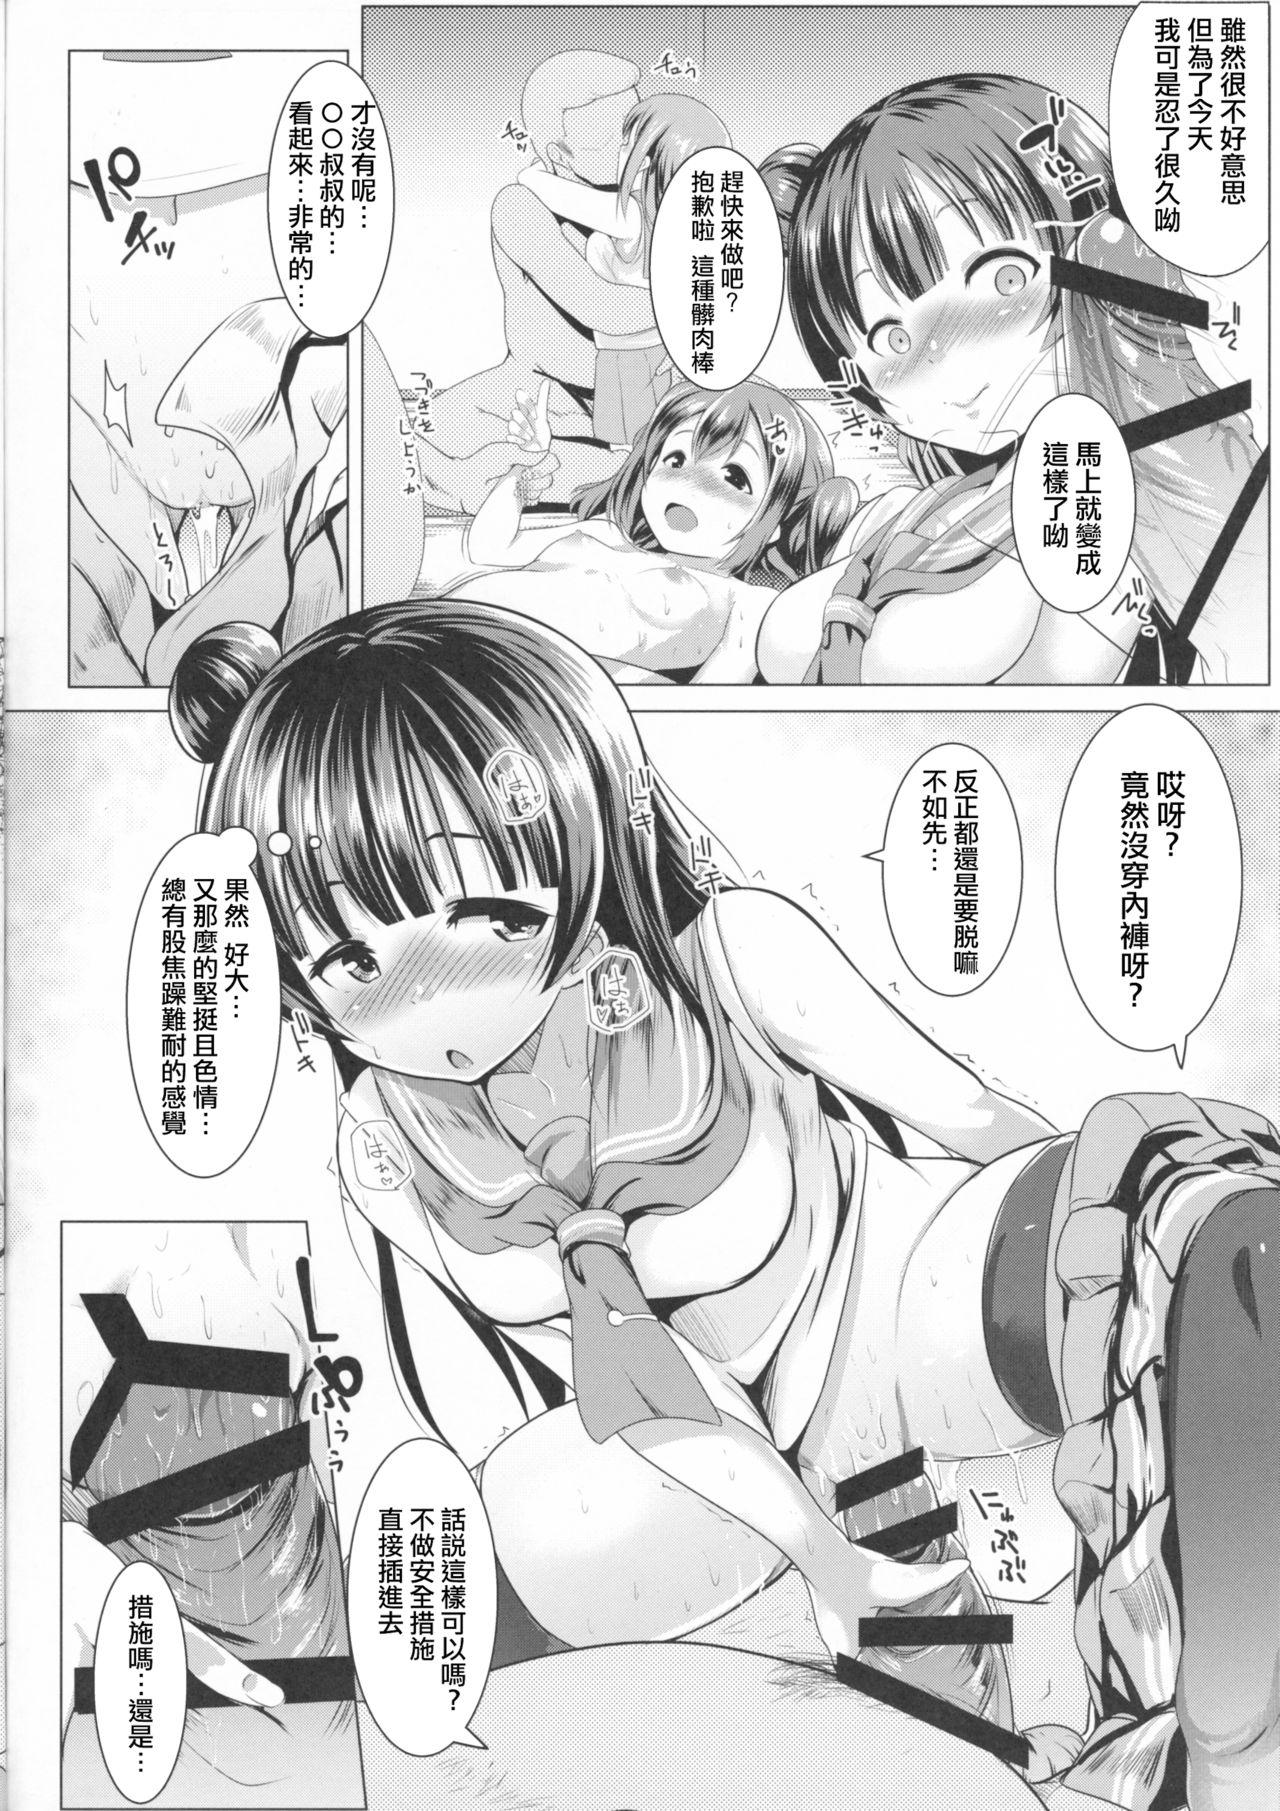 Hard Core Sex SUMMER PROMISCUITY with Yoshimaruby - Love live sunshine Dom - Page 7